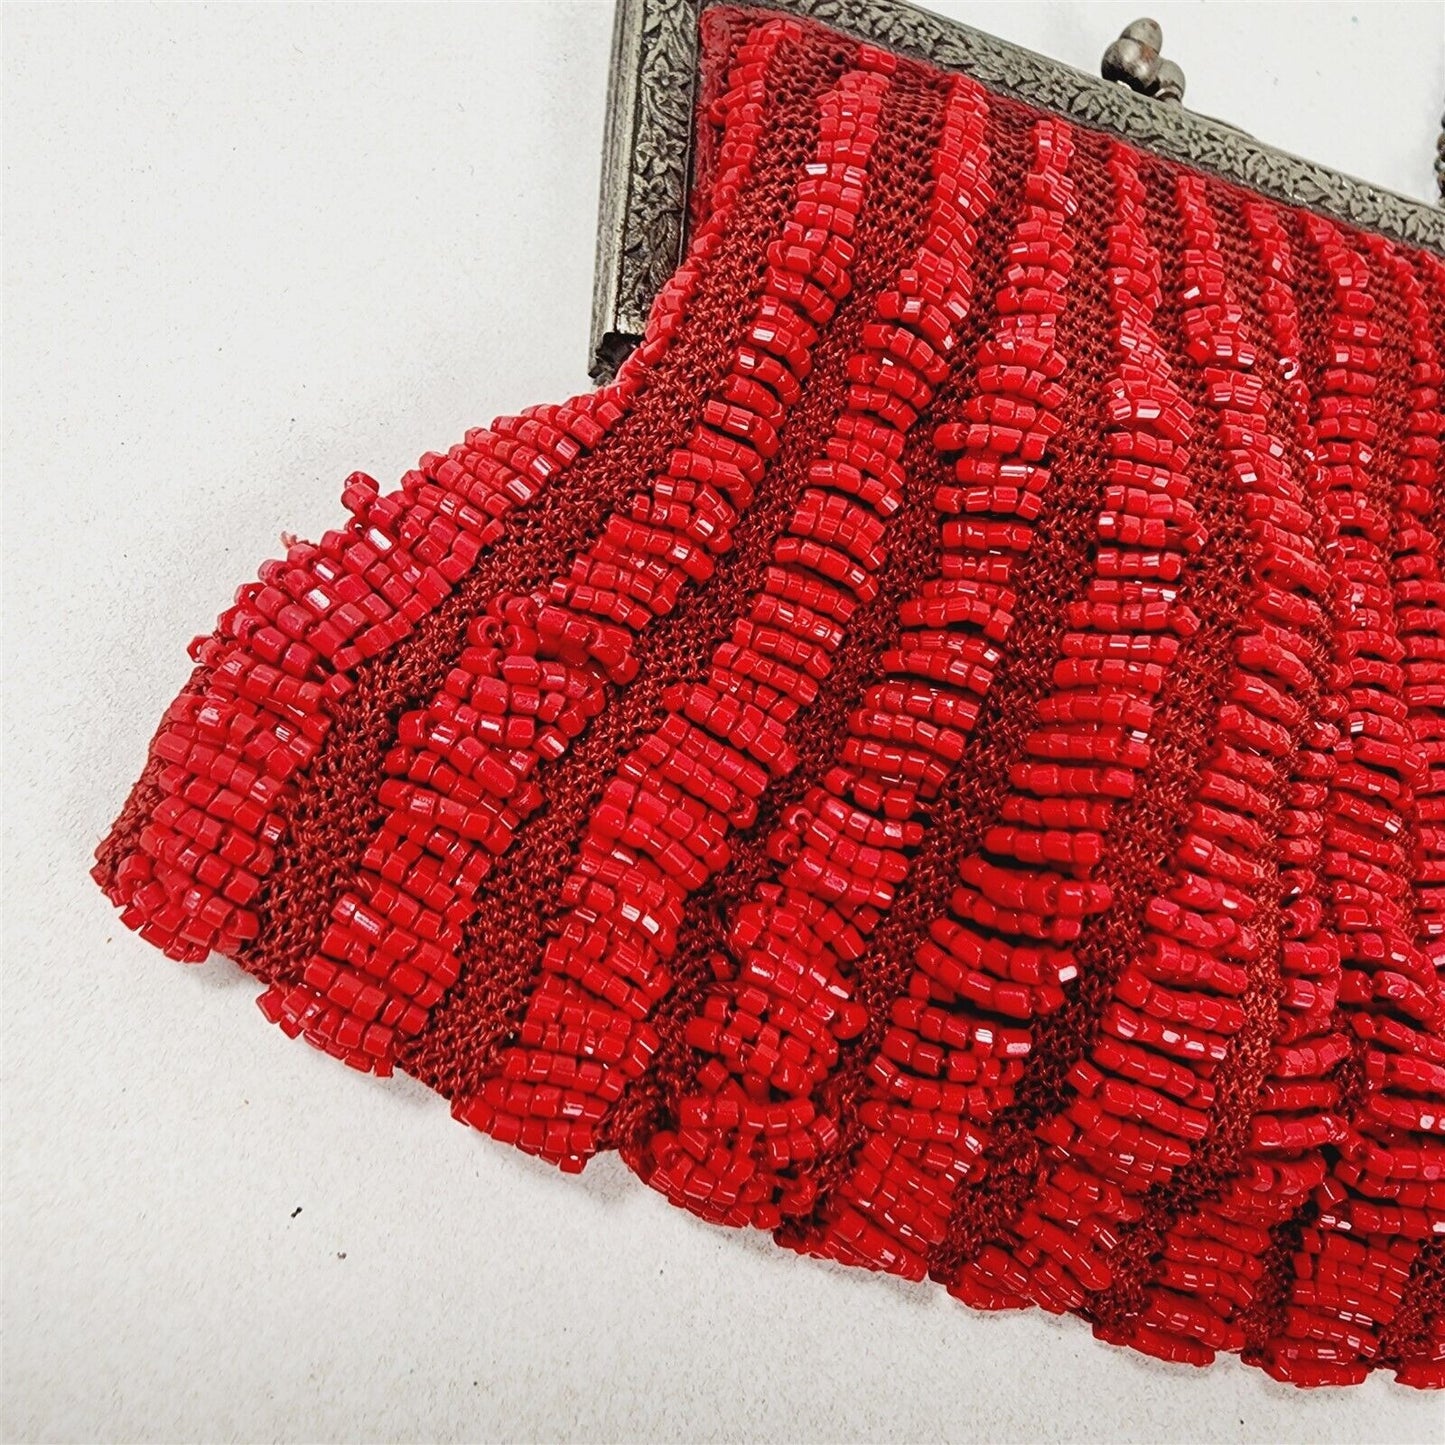 Vintage Red Seed Bead Purse Floral Metal Kiss Clasp Chain Handle